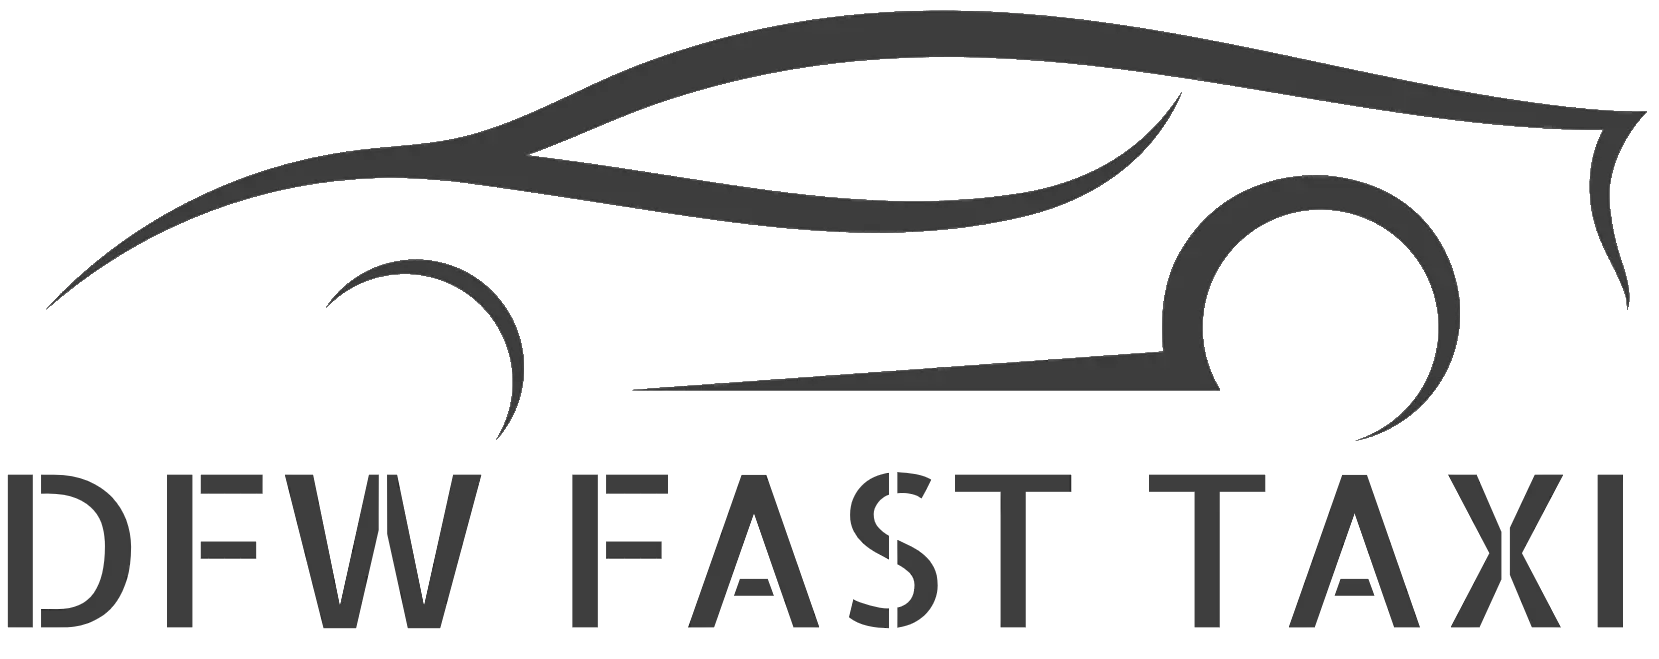 DFW Fast Taxi